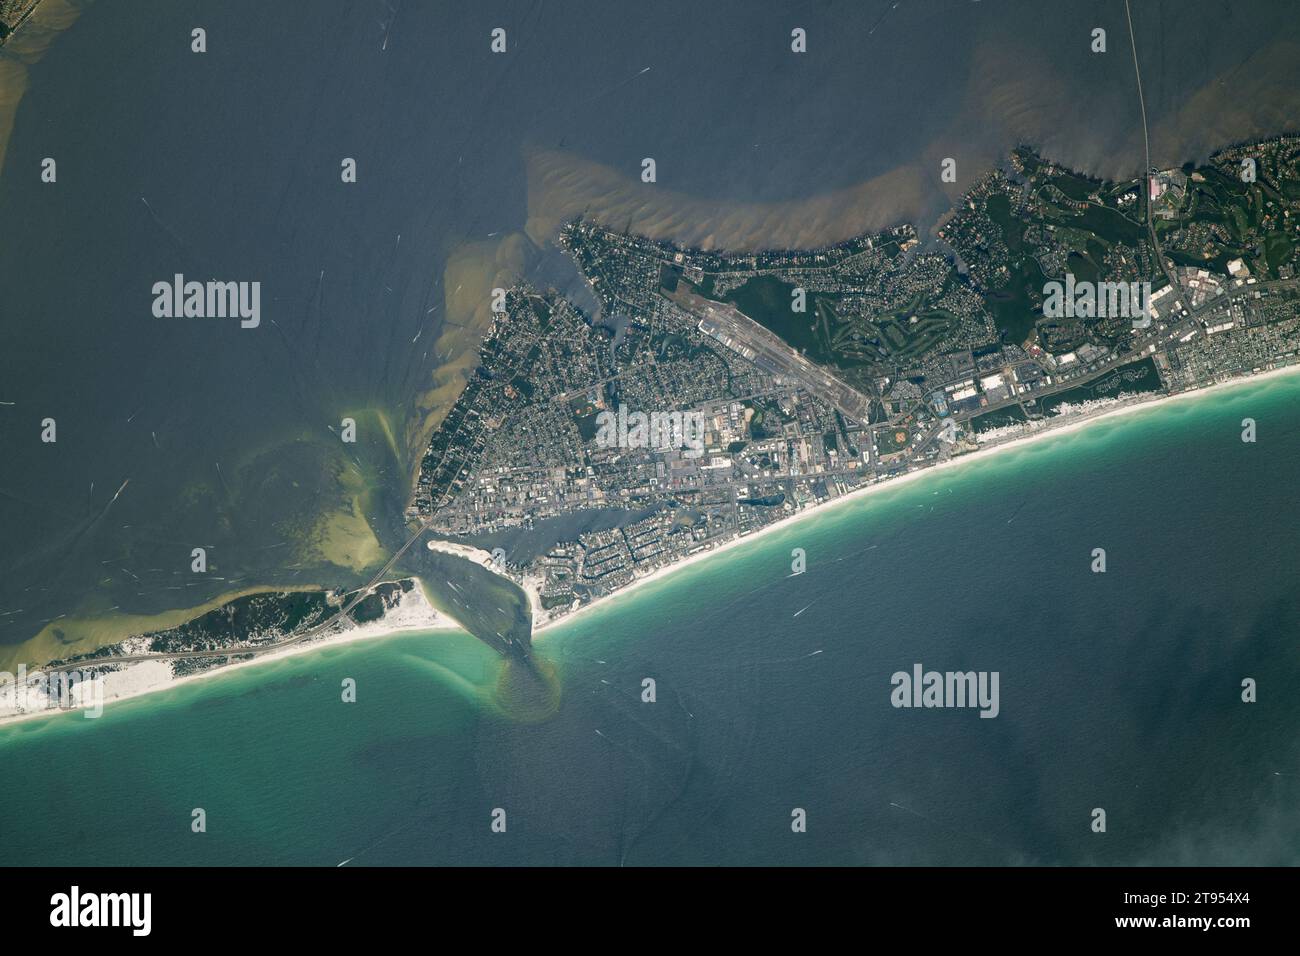 July 30, 2023 - Florida, USA - An astronaut aboard the International Space Station took this photograph of Destin, Florida, a beach city situated on the Gulf of Mexico coastline. Destin is part of Florida's Emerald Coast, an area which spans about 100 miles of the Florida Panhandle. The beaches in this area are known for their 'sugary white' sand and green-toned waters. The white sand is comprised primarily of quartz grains that were transported from the southern Appalachian Mountains by the Apalachicola River system. Sunlight interacting with algae in the water produces the emerald color. (Cr Stock Photo